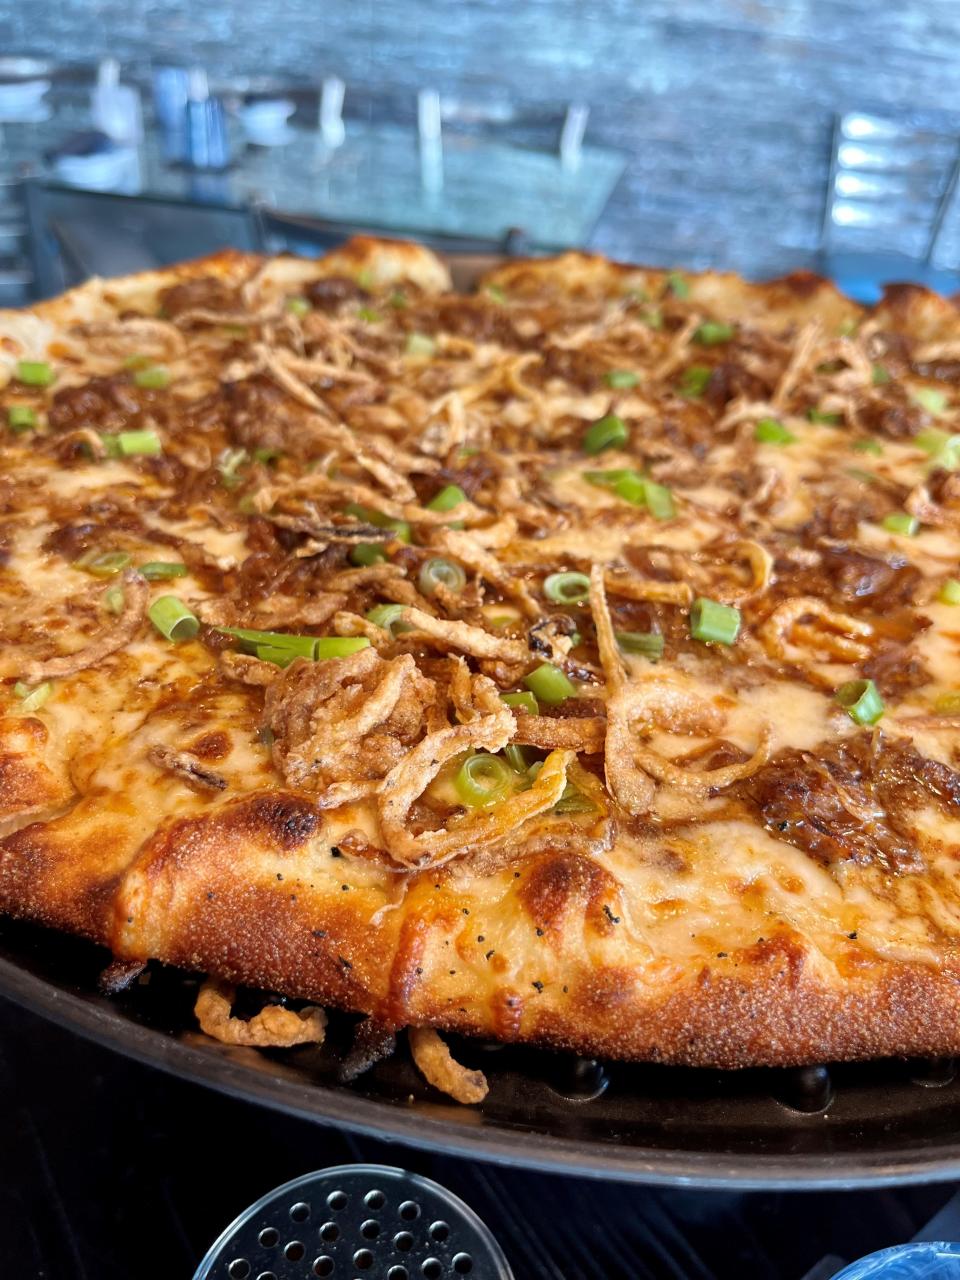 The Sooie pizza from High Tide Social House comes with white sauce, mozzarella/provolone, pulled pork, SoHo sauce, green onion and frizzled onion.